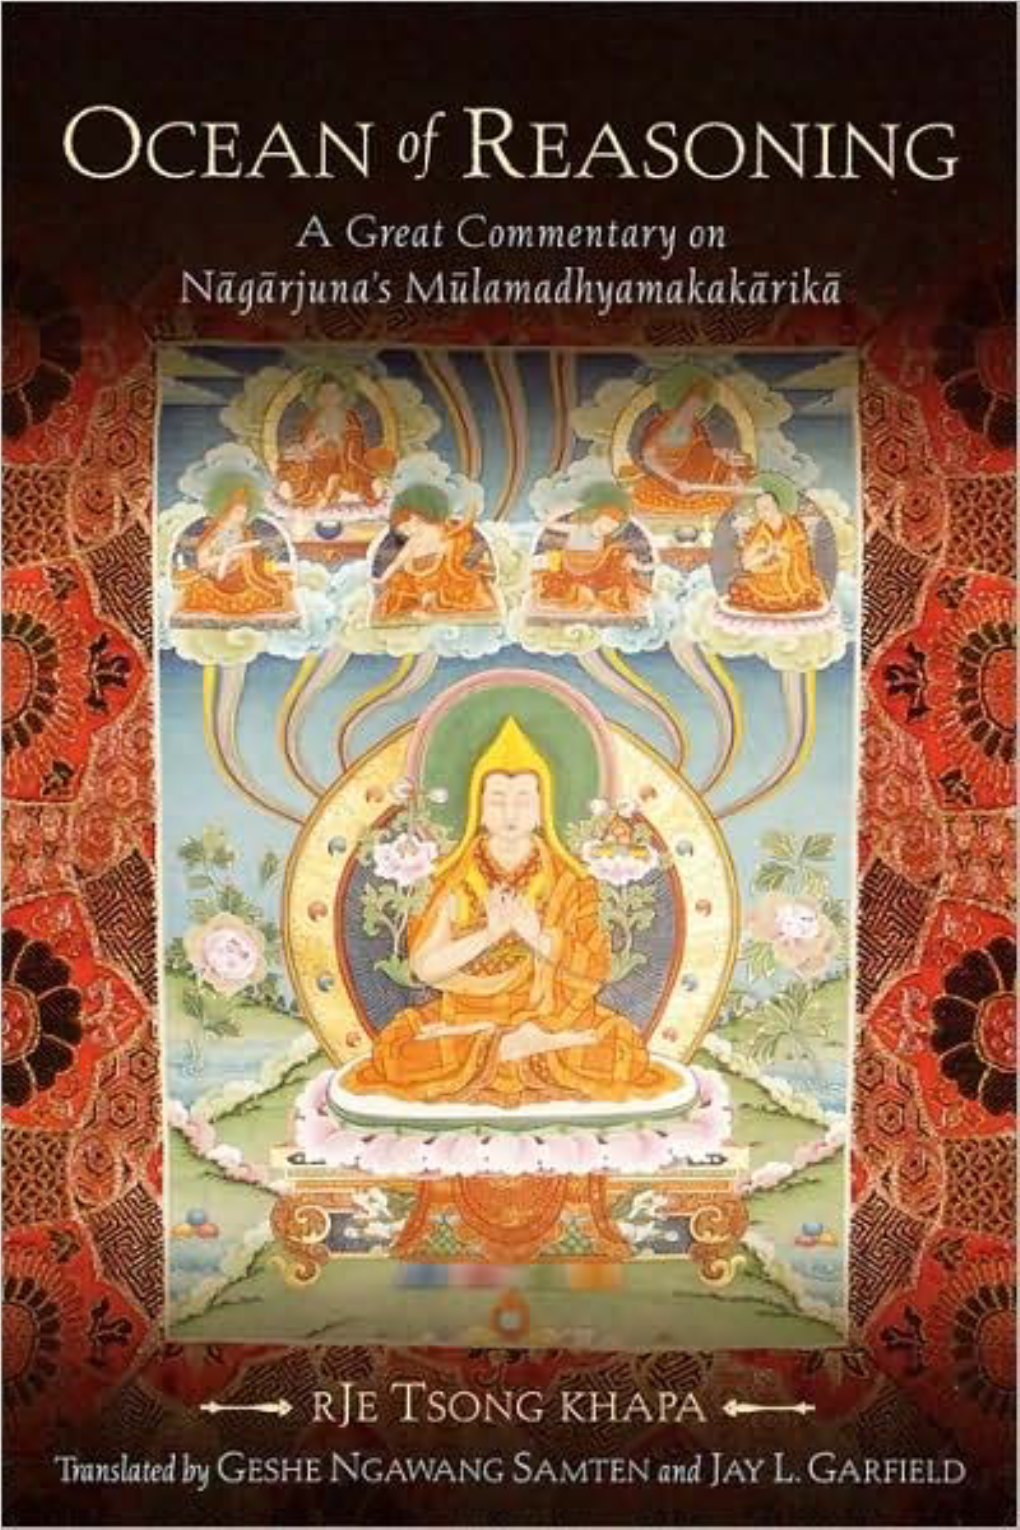 Ocean of Reasoning: a Great Commentary on Nagarjuna's